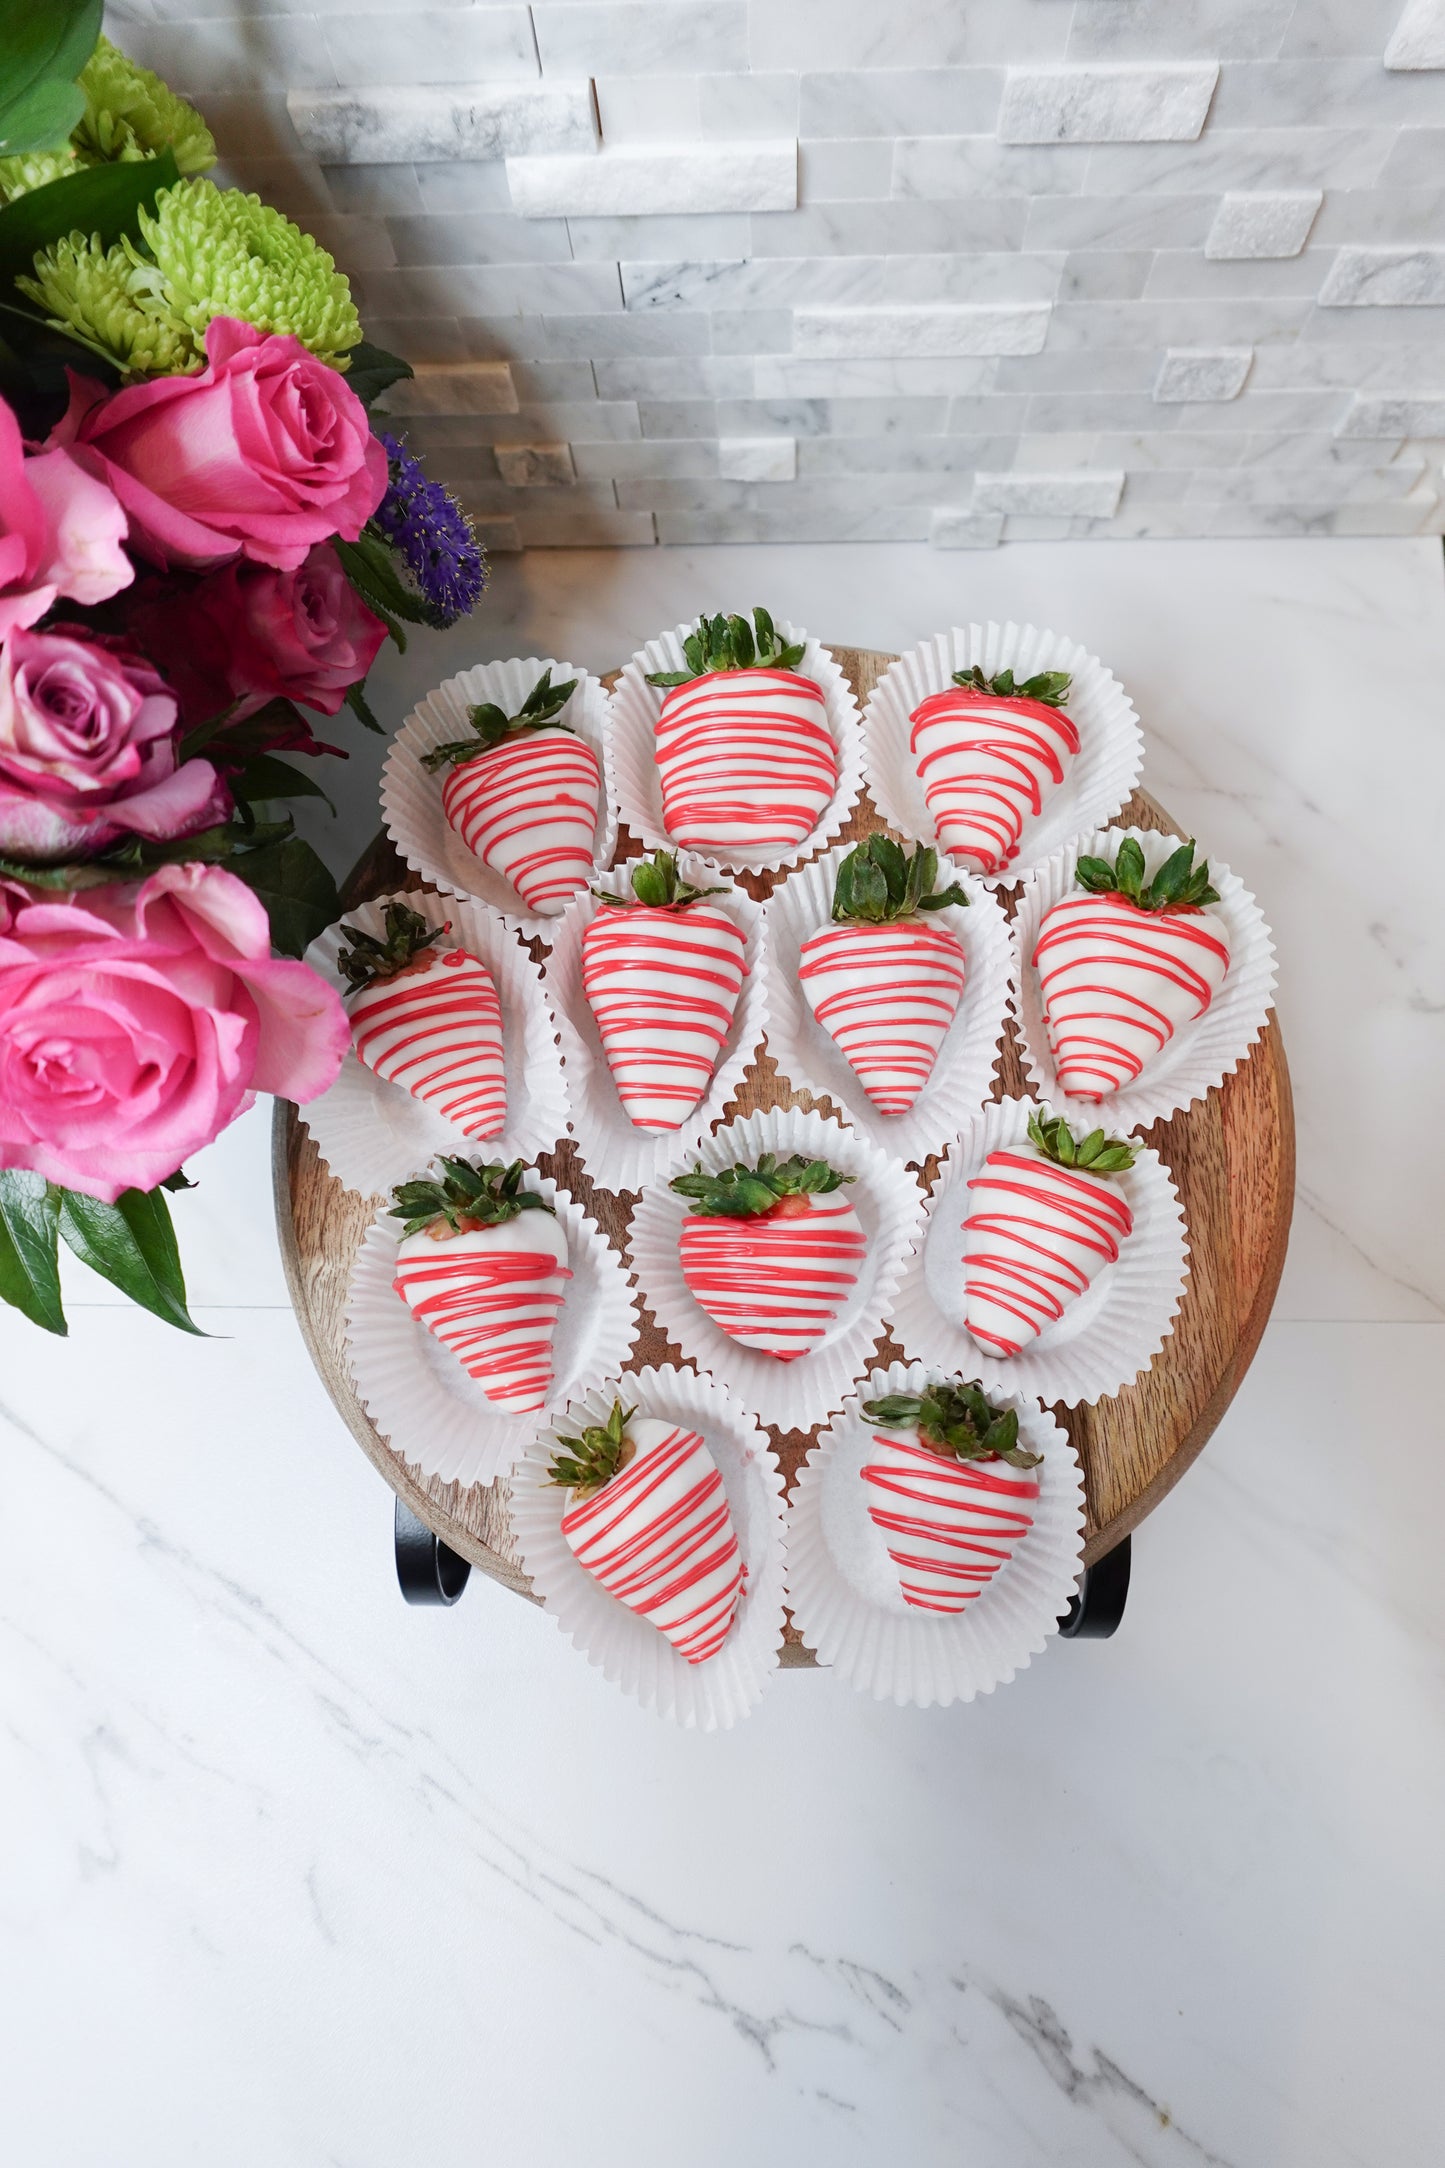 Chocolate Covered Strawberries-LOCAL ONLY